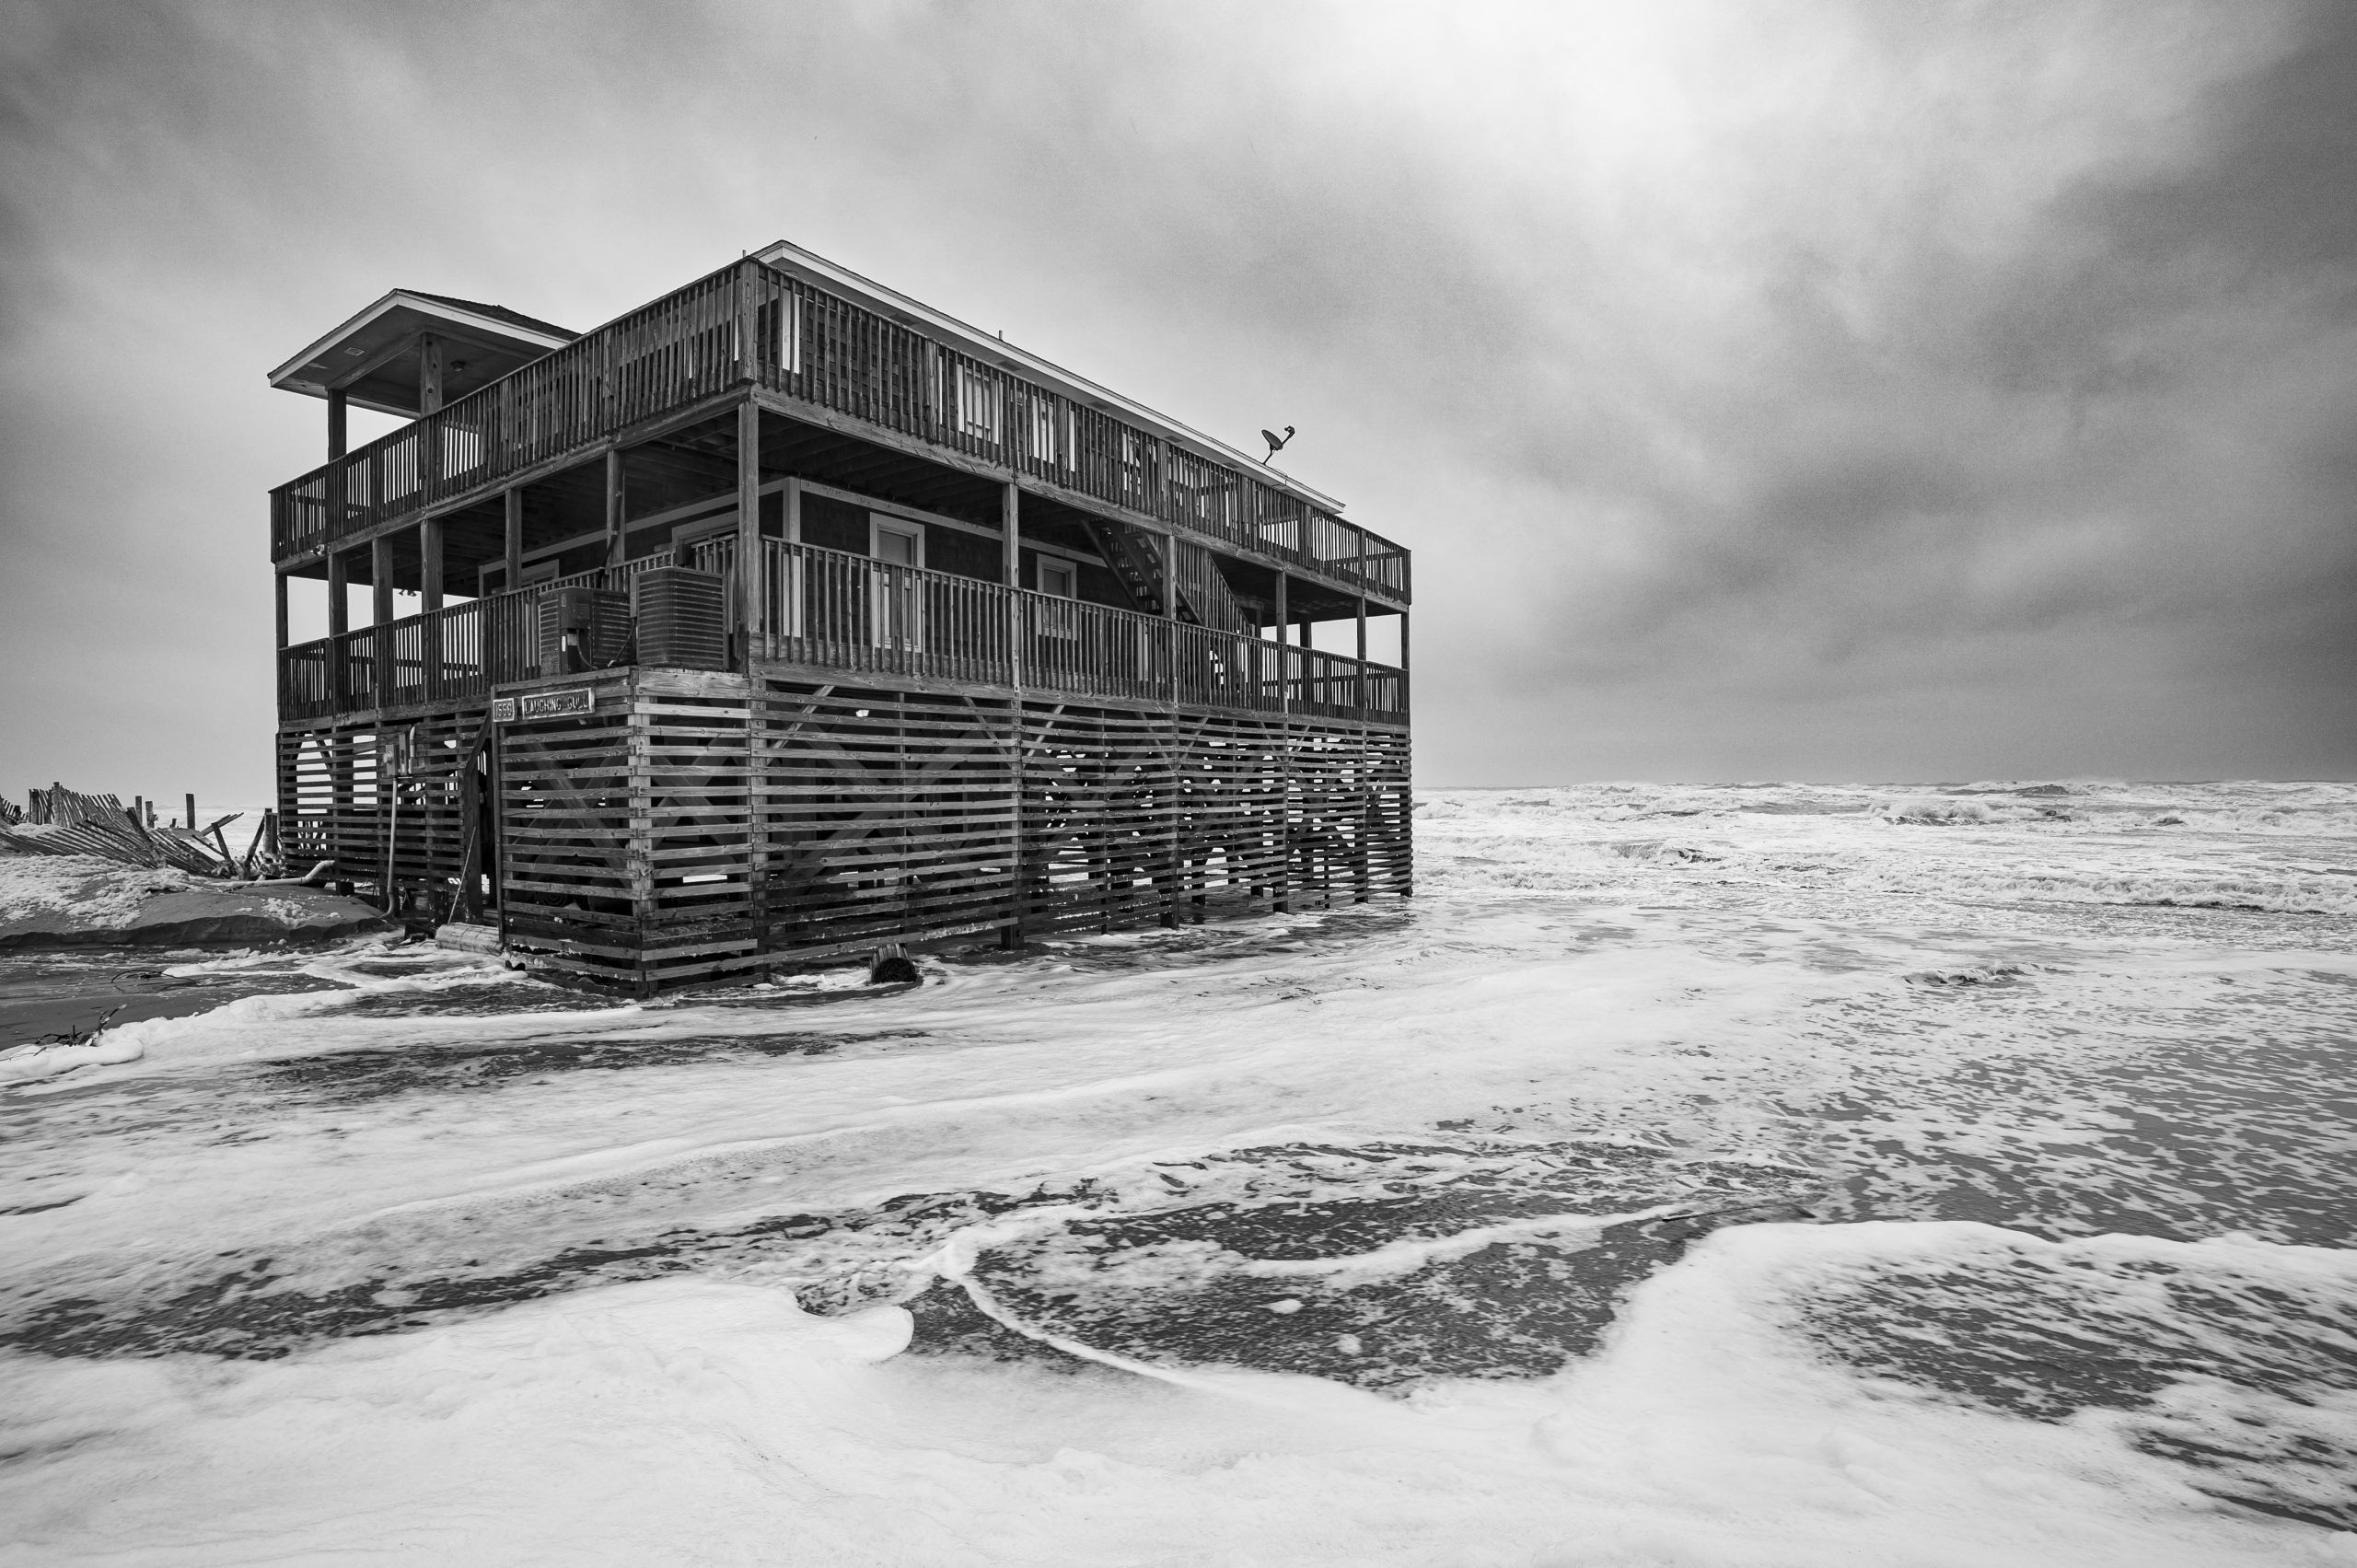 Surf washes around an Outer Banks home during a nor’easter in November 2019. Image by Jared Lloyd. United States, 2019.